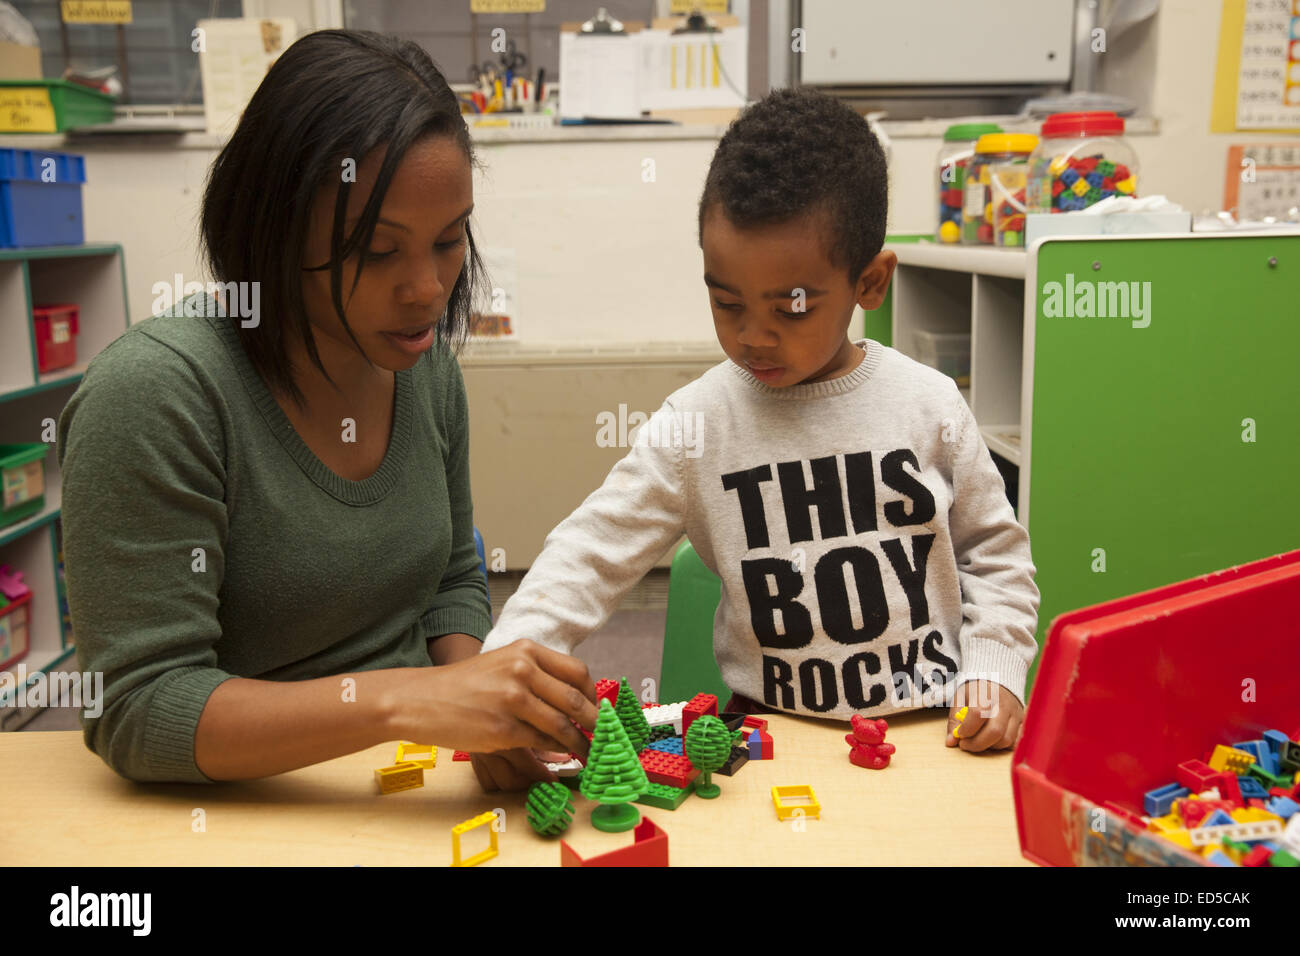 Day Care nursery school on the Lower East Side of Manhattan. Teacher works with child. Stock Photo